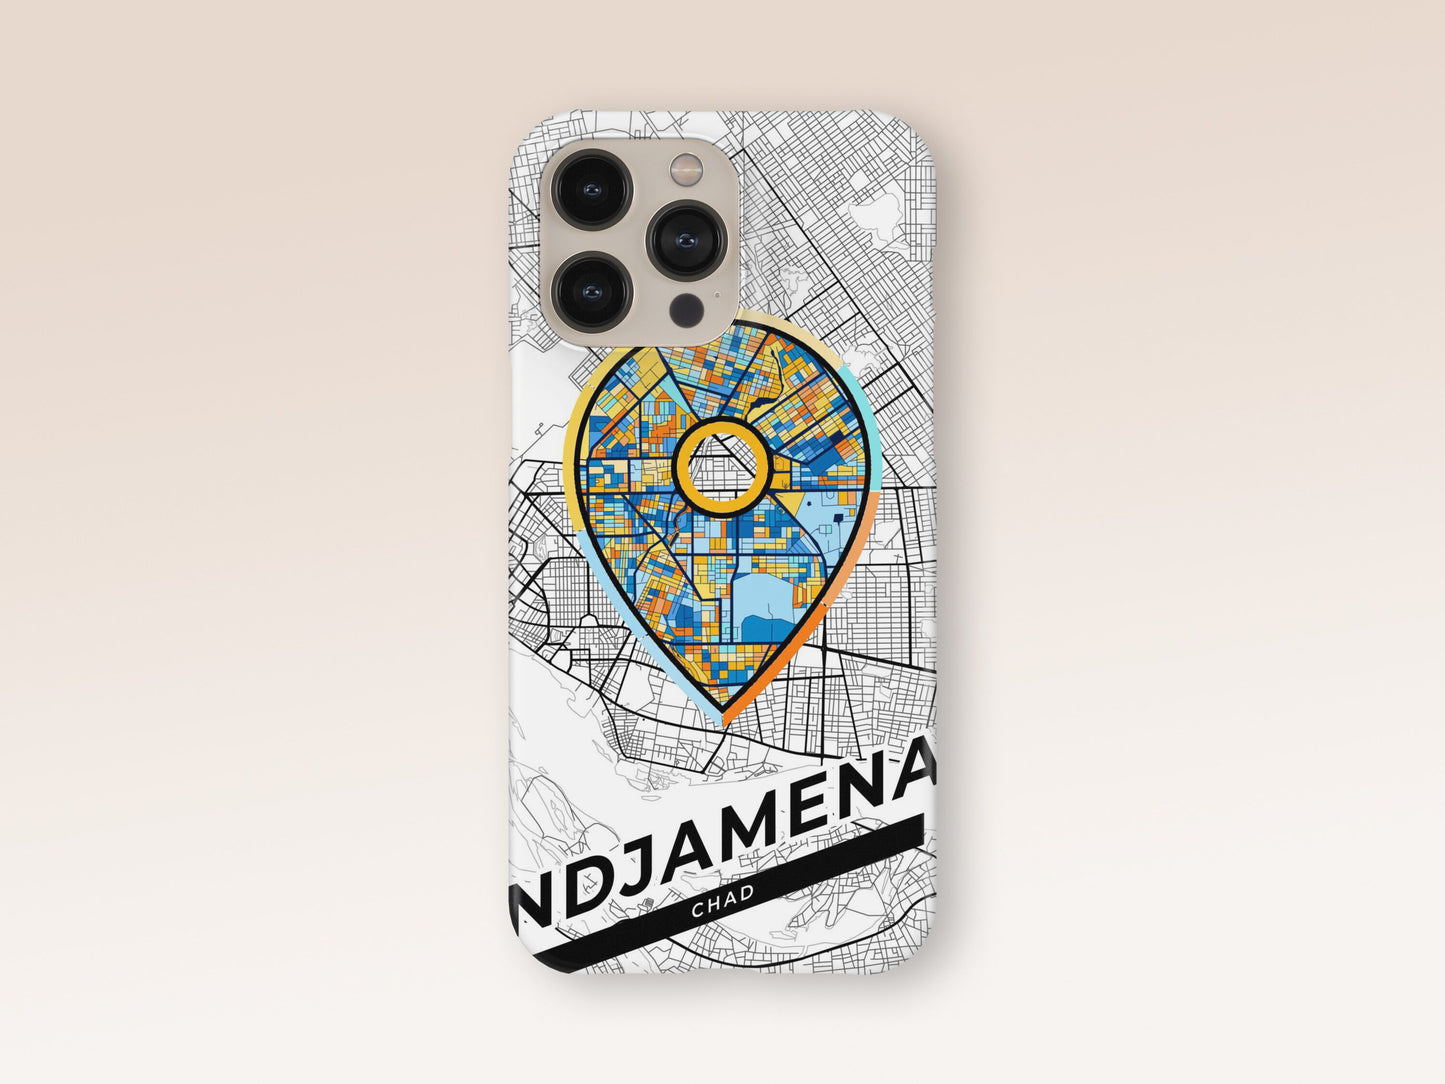 Ndjamena Chad slim phone case with colorful icon. Birthday, wedding or housewarming gift. Couple match cases. 1